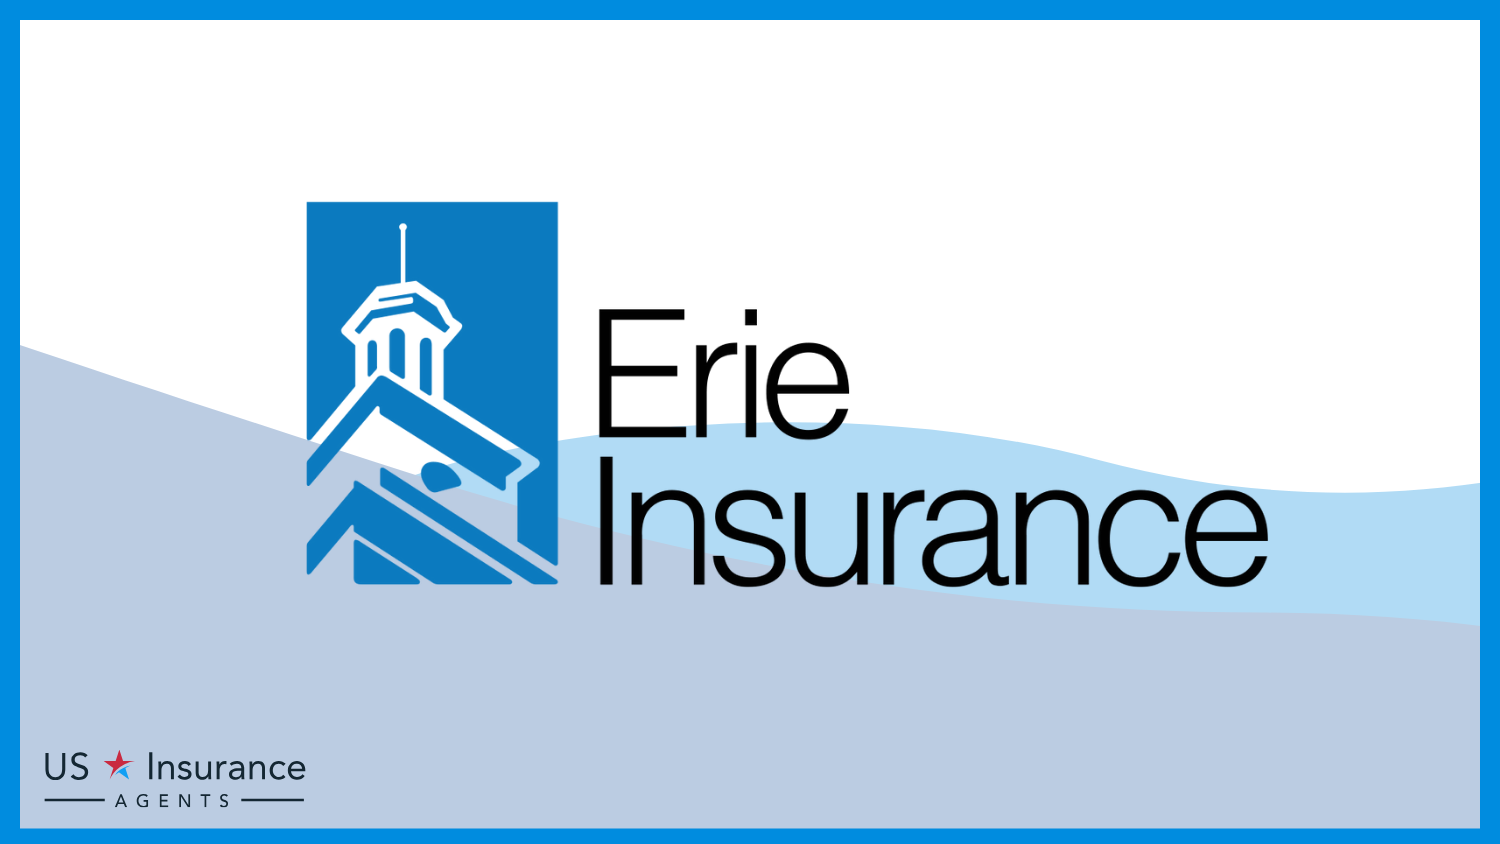 Erie: Best Business Insurance for Bed & Breakfasts